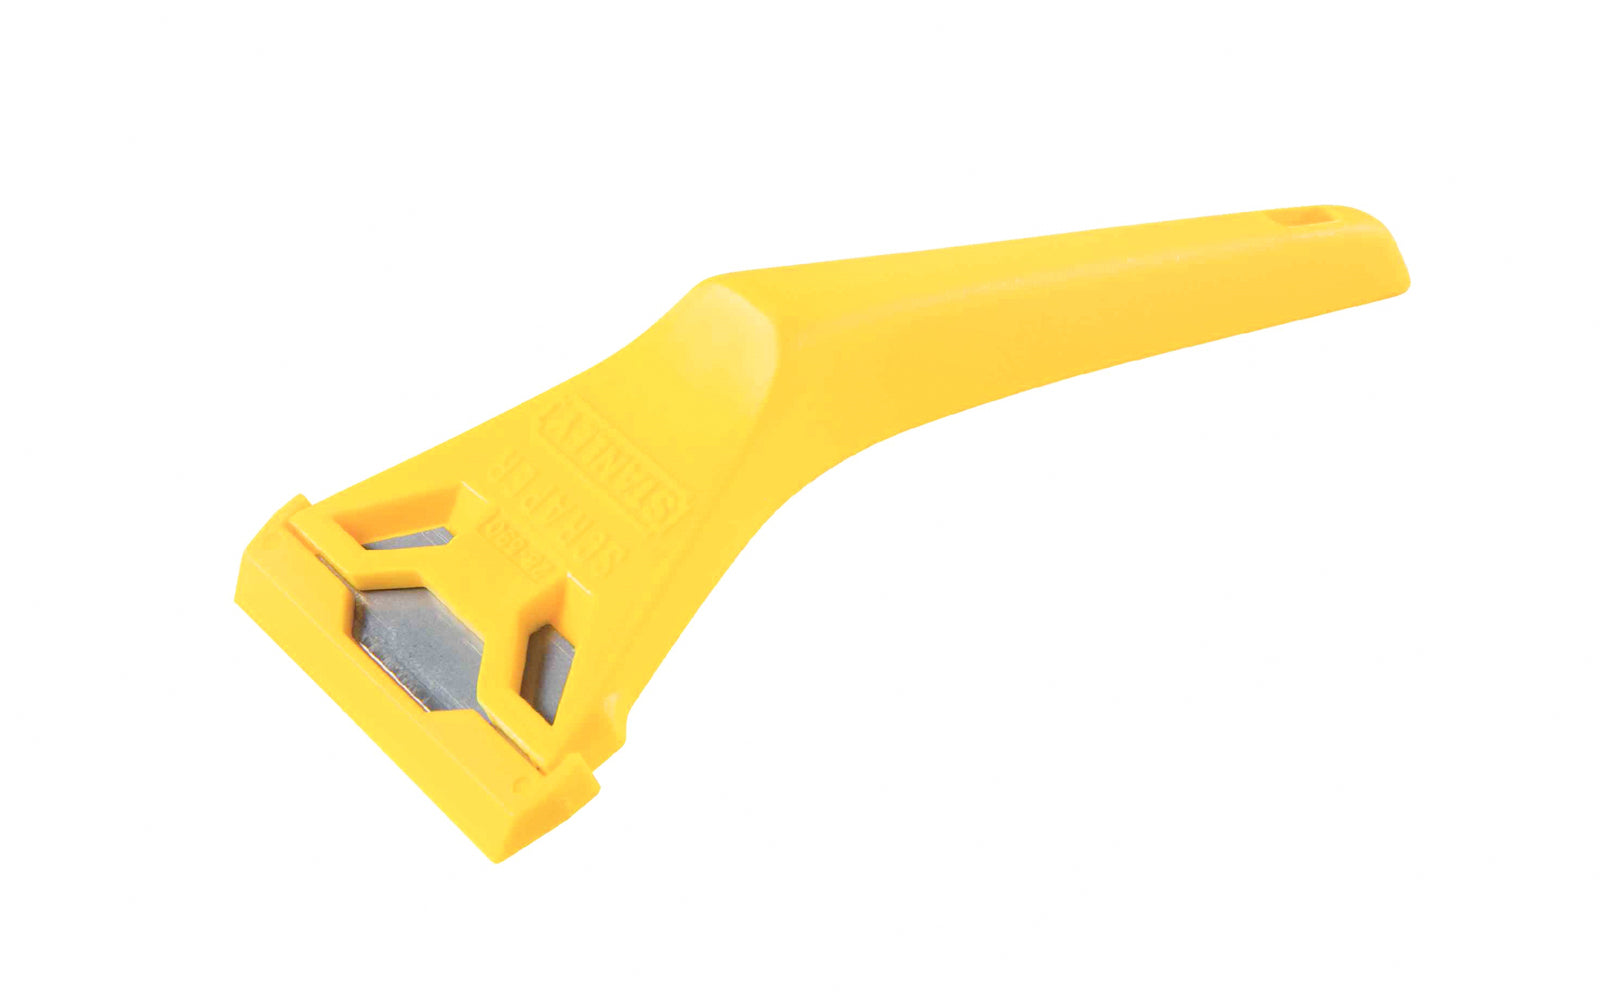 Model No. 28-593.  The Stanley Window Utility Scraper is ideal for scraping paint from windows, mirrors, tiles & other flat surfaces. Comes with one 11-921 utility knife blade. 2-3/8